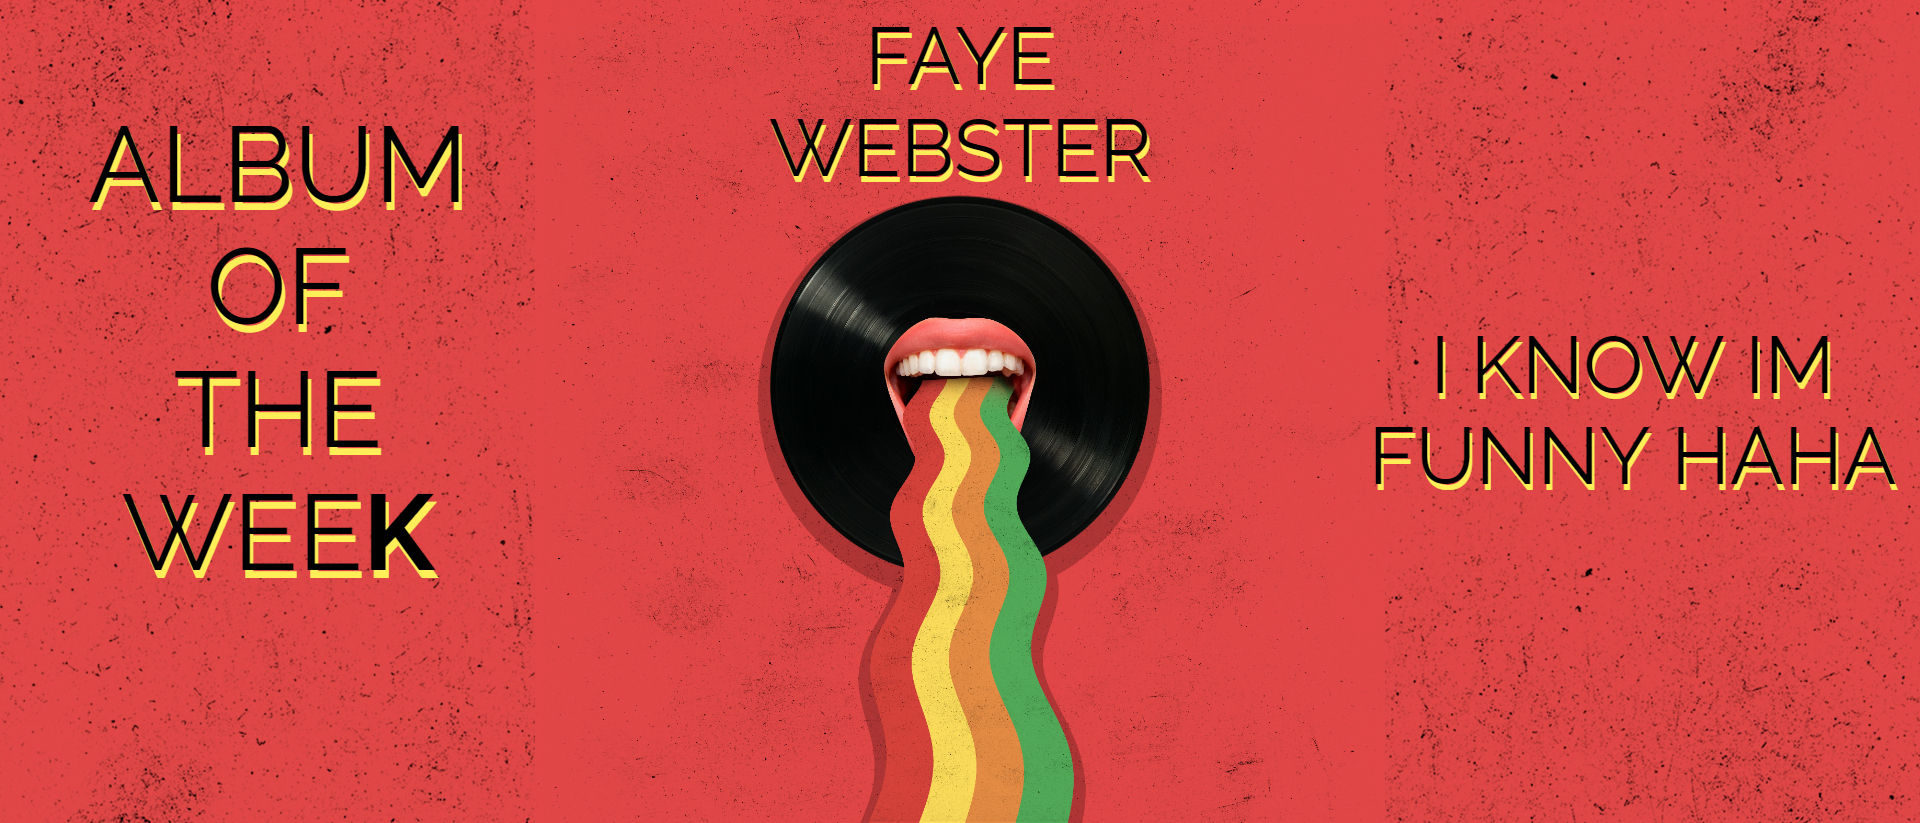 ALBUM OF THE WEEK: FAYE WEBSTER: I KNOW IM FUNNY HAHA: 2021